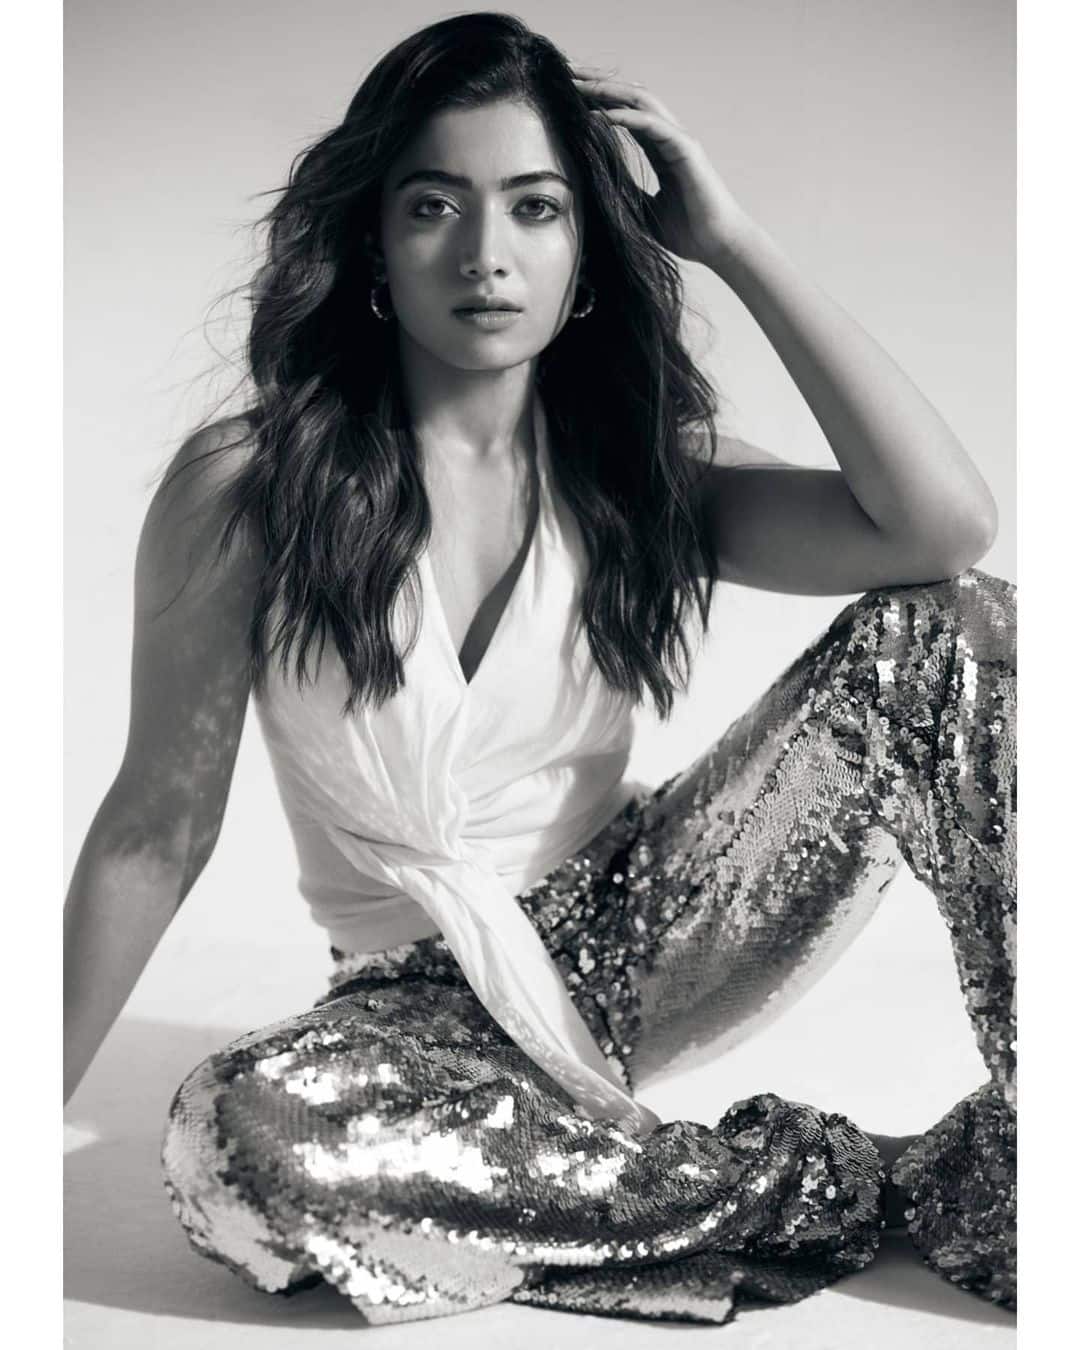 Rashmika looks party ready in white top paired with sequined pants